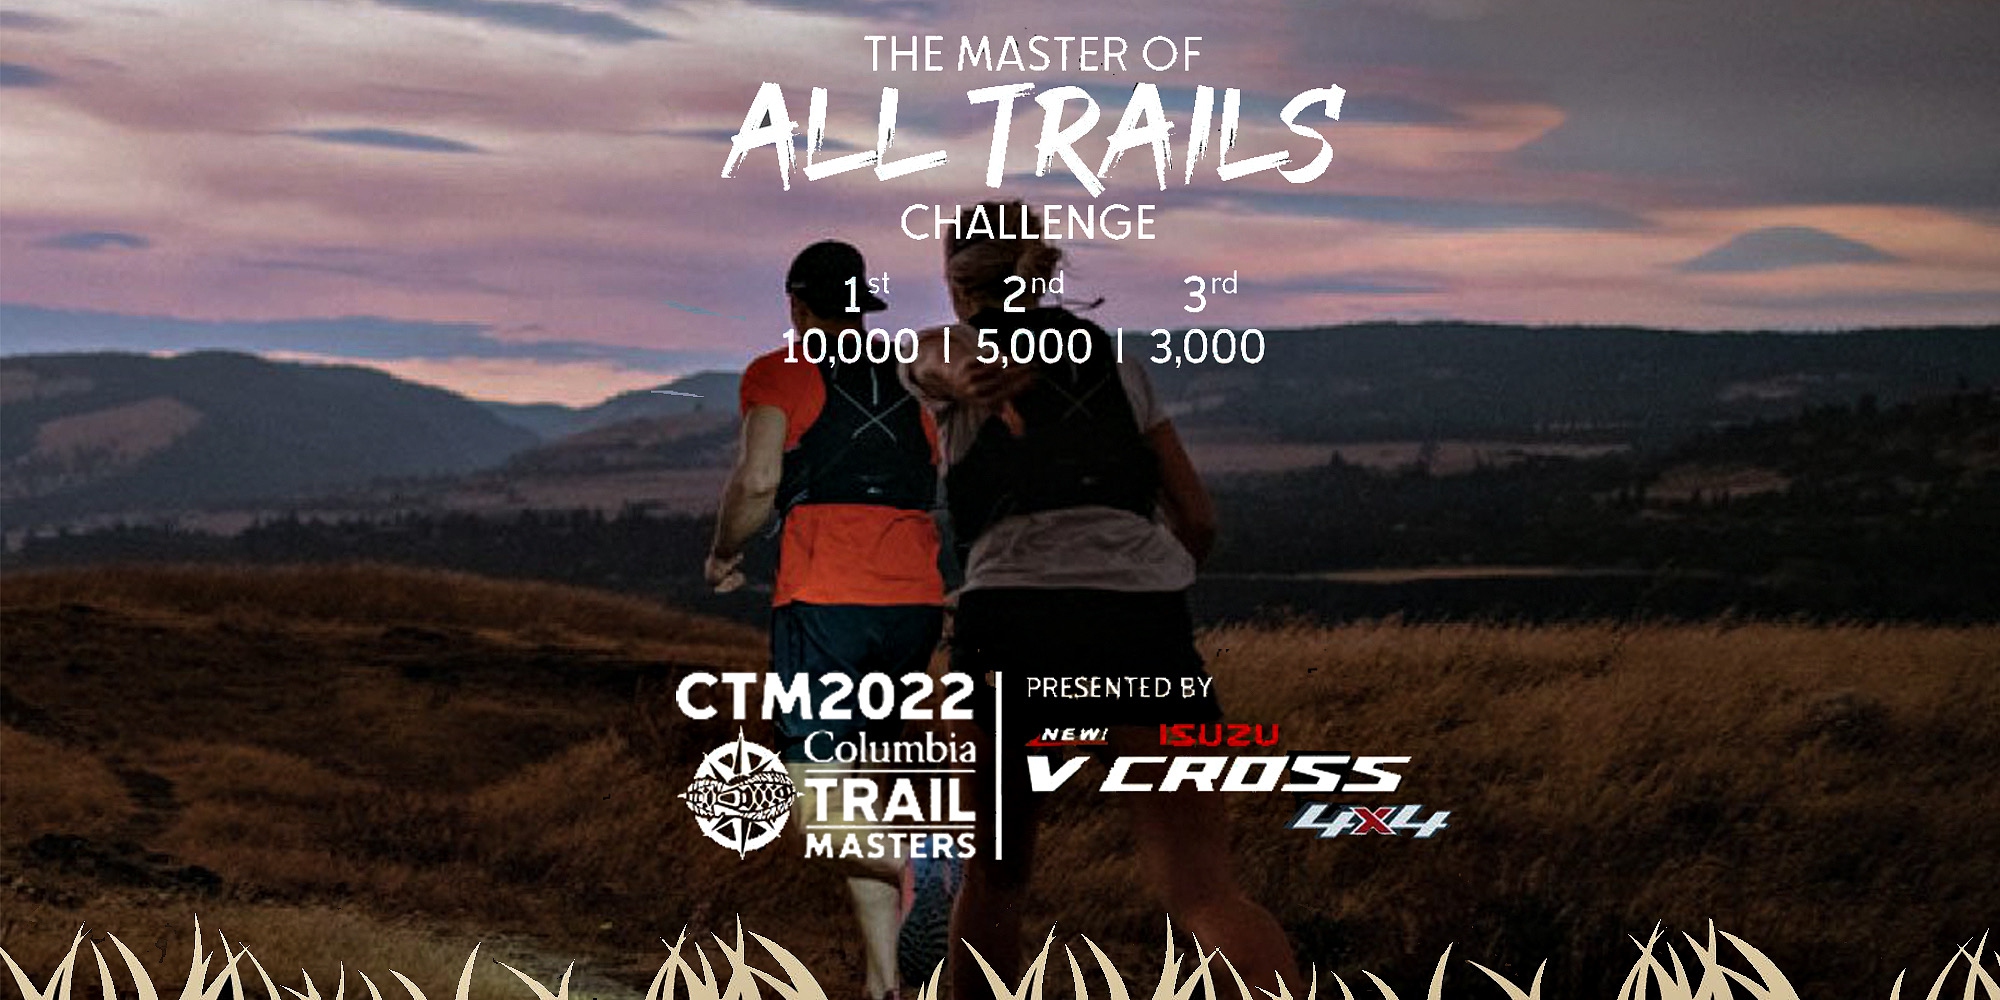 THE MASTER OF ALL TRAILS CHALLENGE by ISUZU V-CROSS 4X4